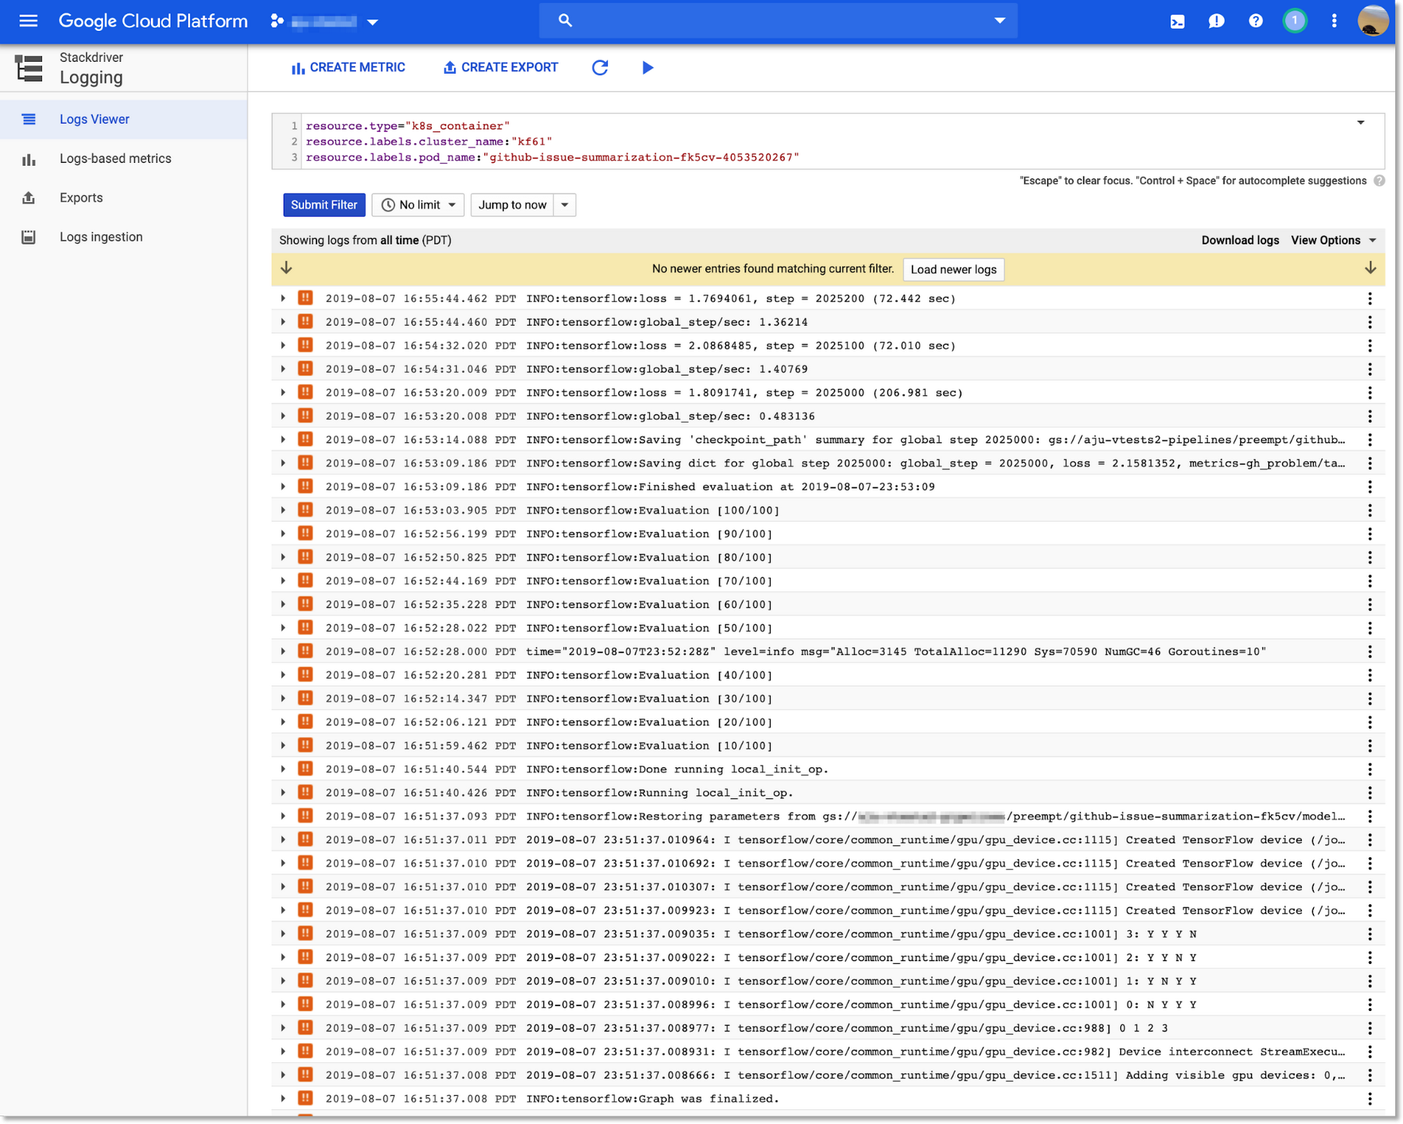 https://storage.googleapis.com/gweb-cloudblog-publish/images/Stackdriver_link_in_the_Kubeflow_Pipelines.max-2000x1124.png